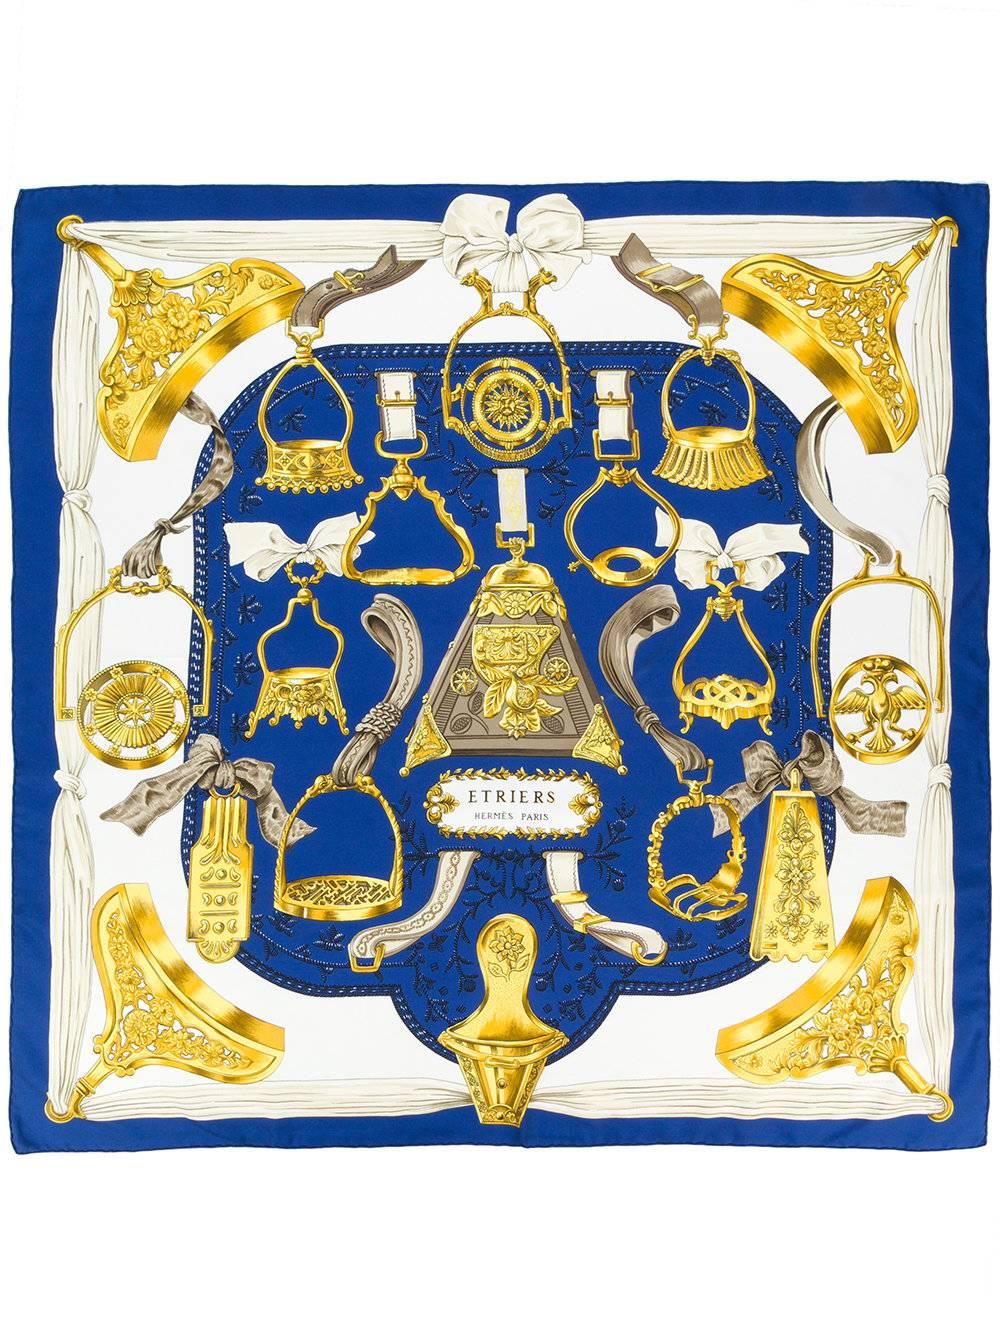 This beautiful blue silk Etriers scarf from Hermès Vintage features a golden stirrup print with a blue border. Perfectly adds a sophisticated pop of colour to your look. 

Colour: Blue/ Gold/ White

Material: 100% Silk

Measurements: 88cm x 86cm